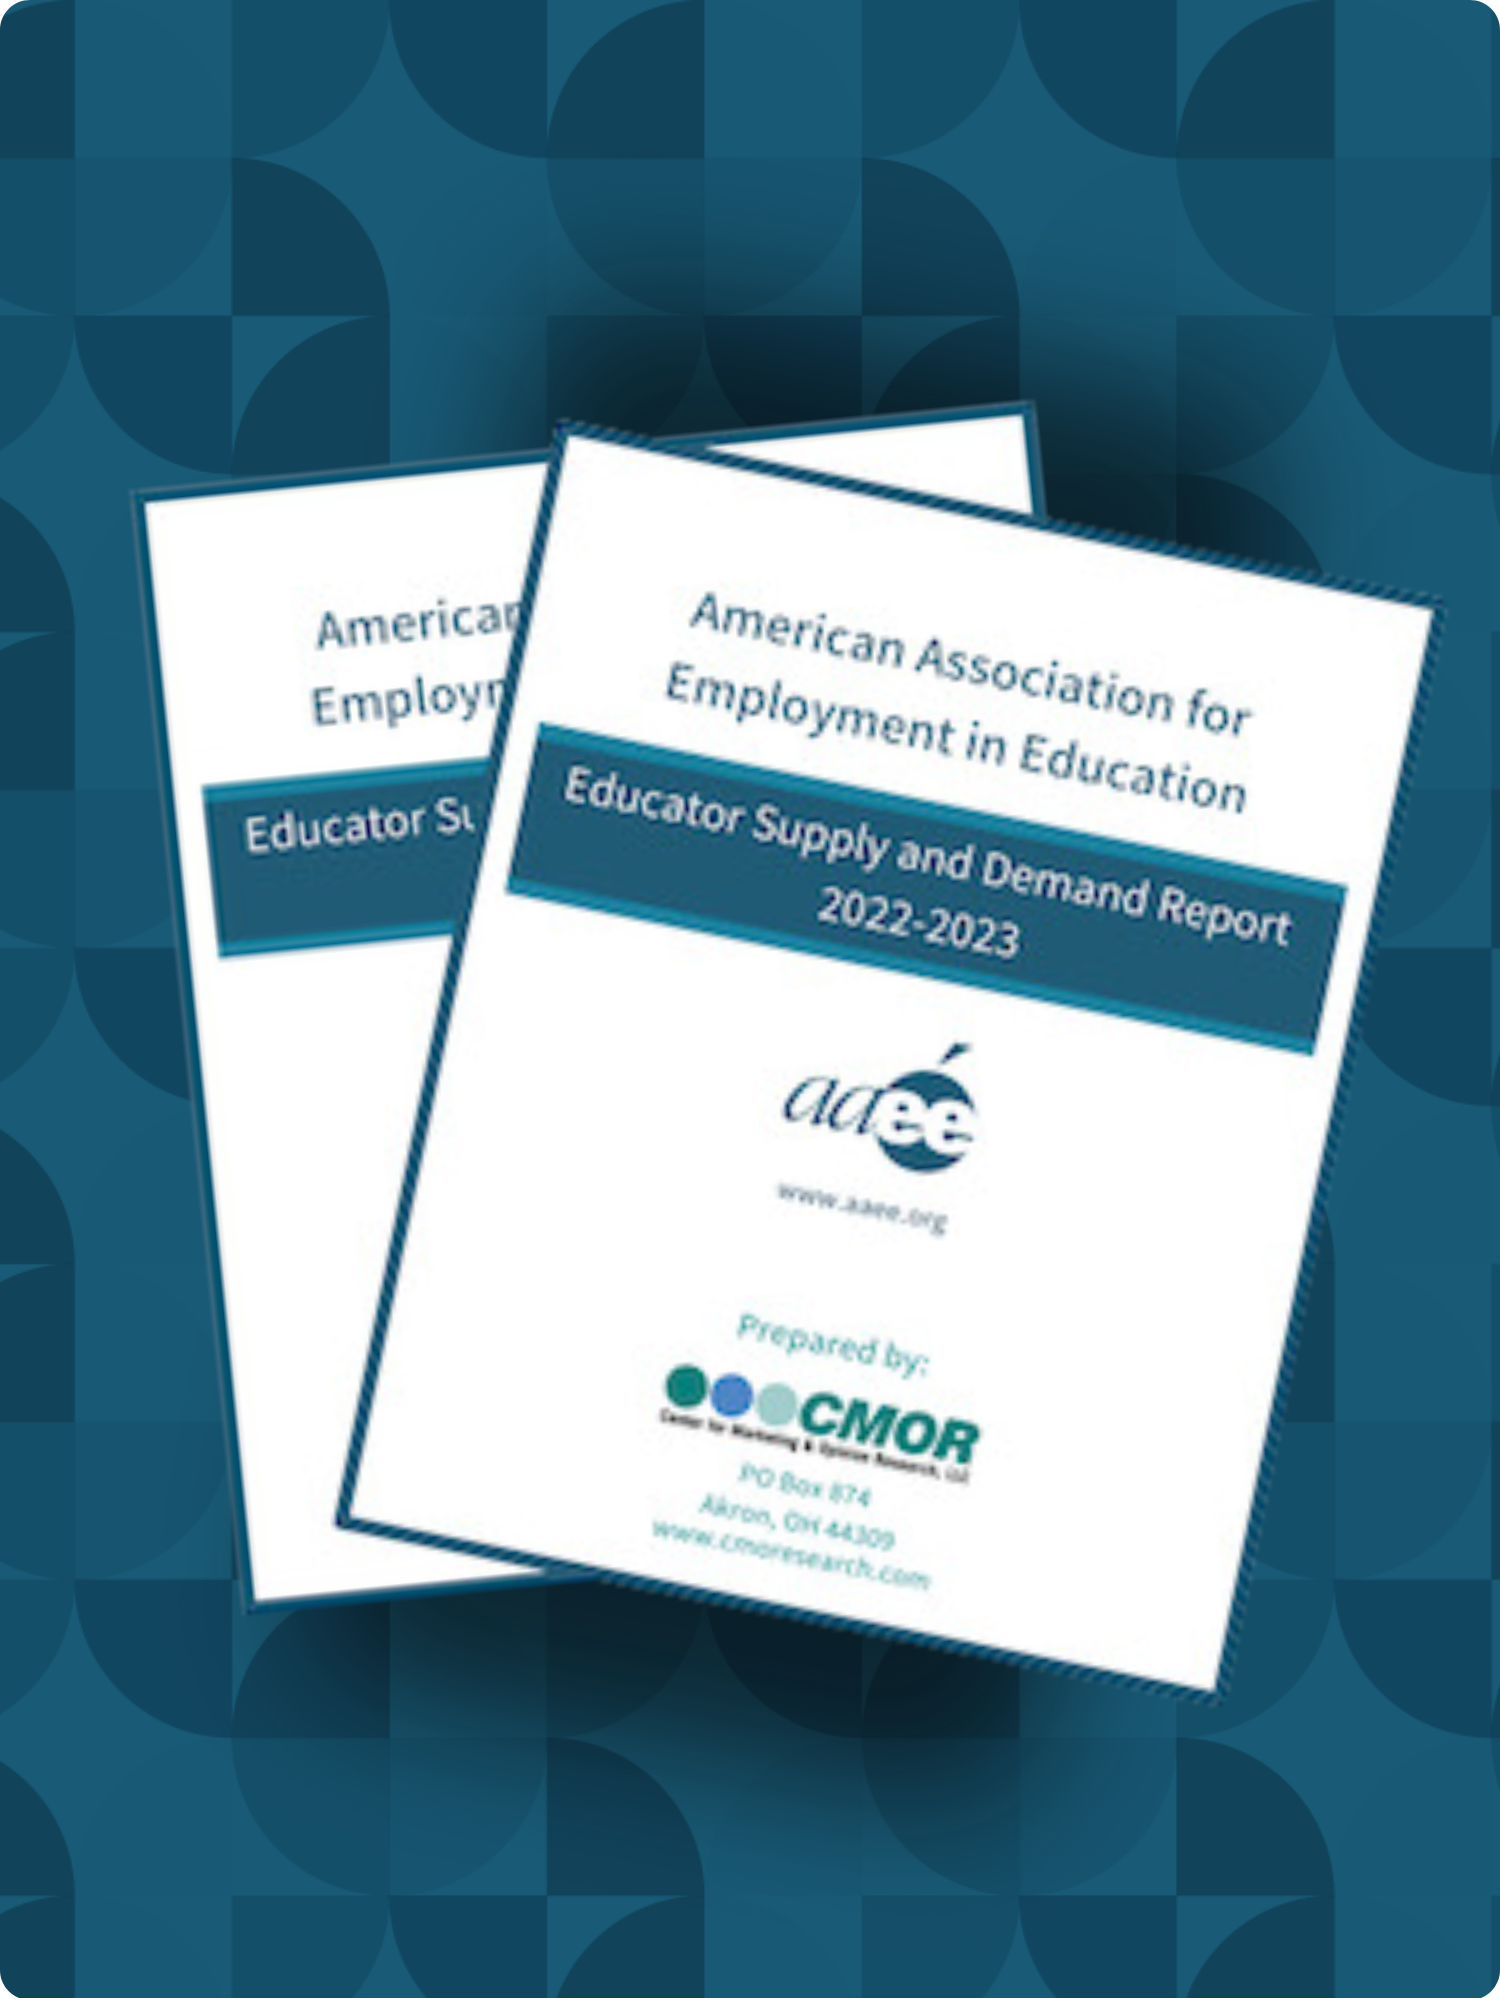 Three copies of the american association for employment in education educator supply and demand report